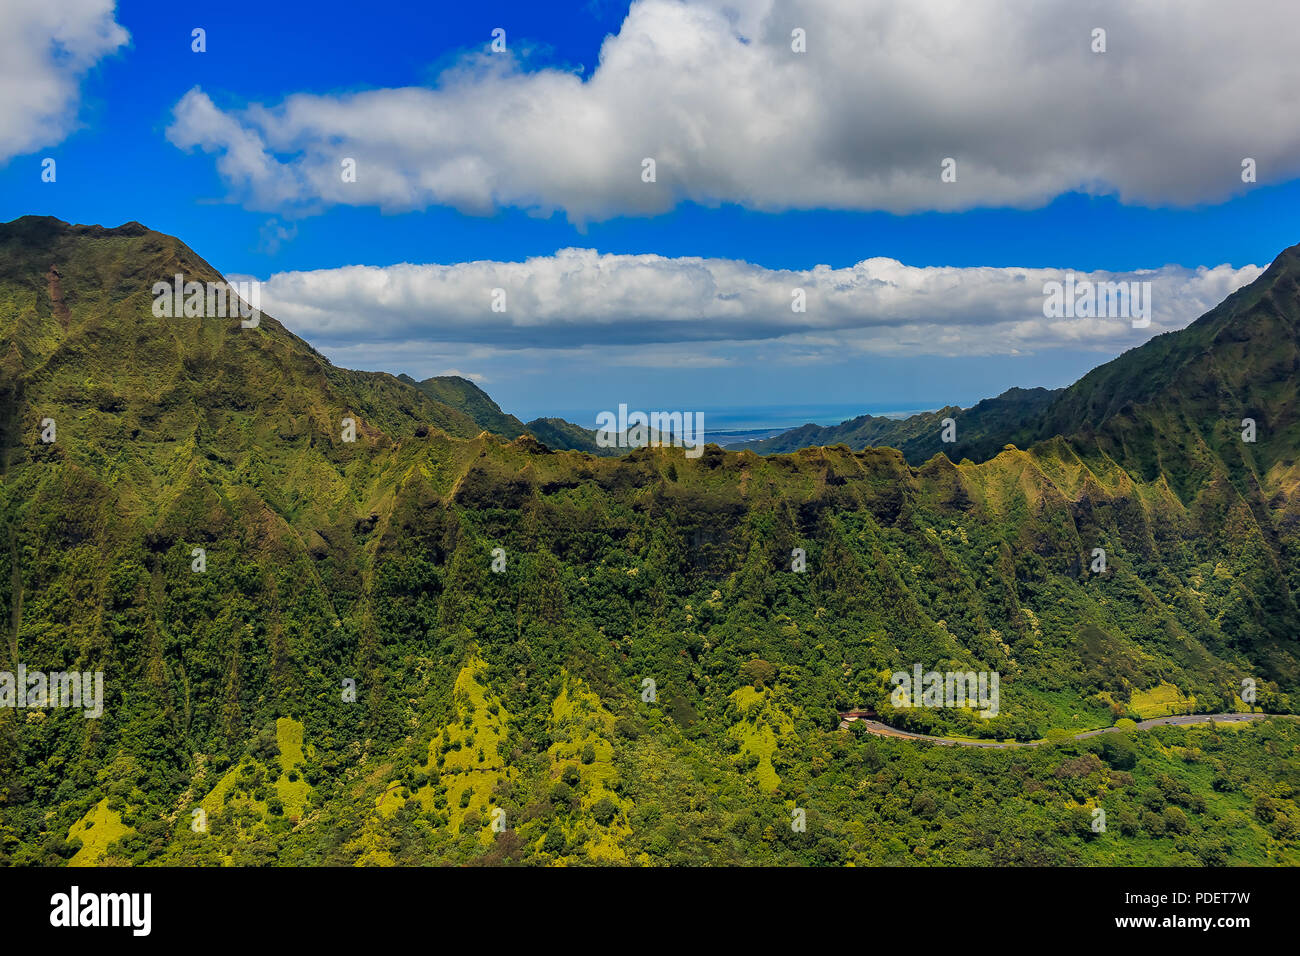 Aerial view mountain ridge line in Honolulu Hawaii from a helicopter Stock Photo